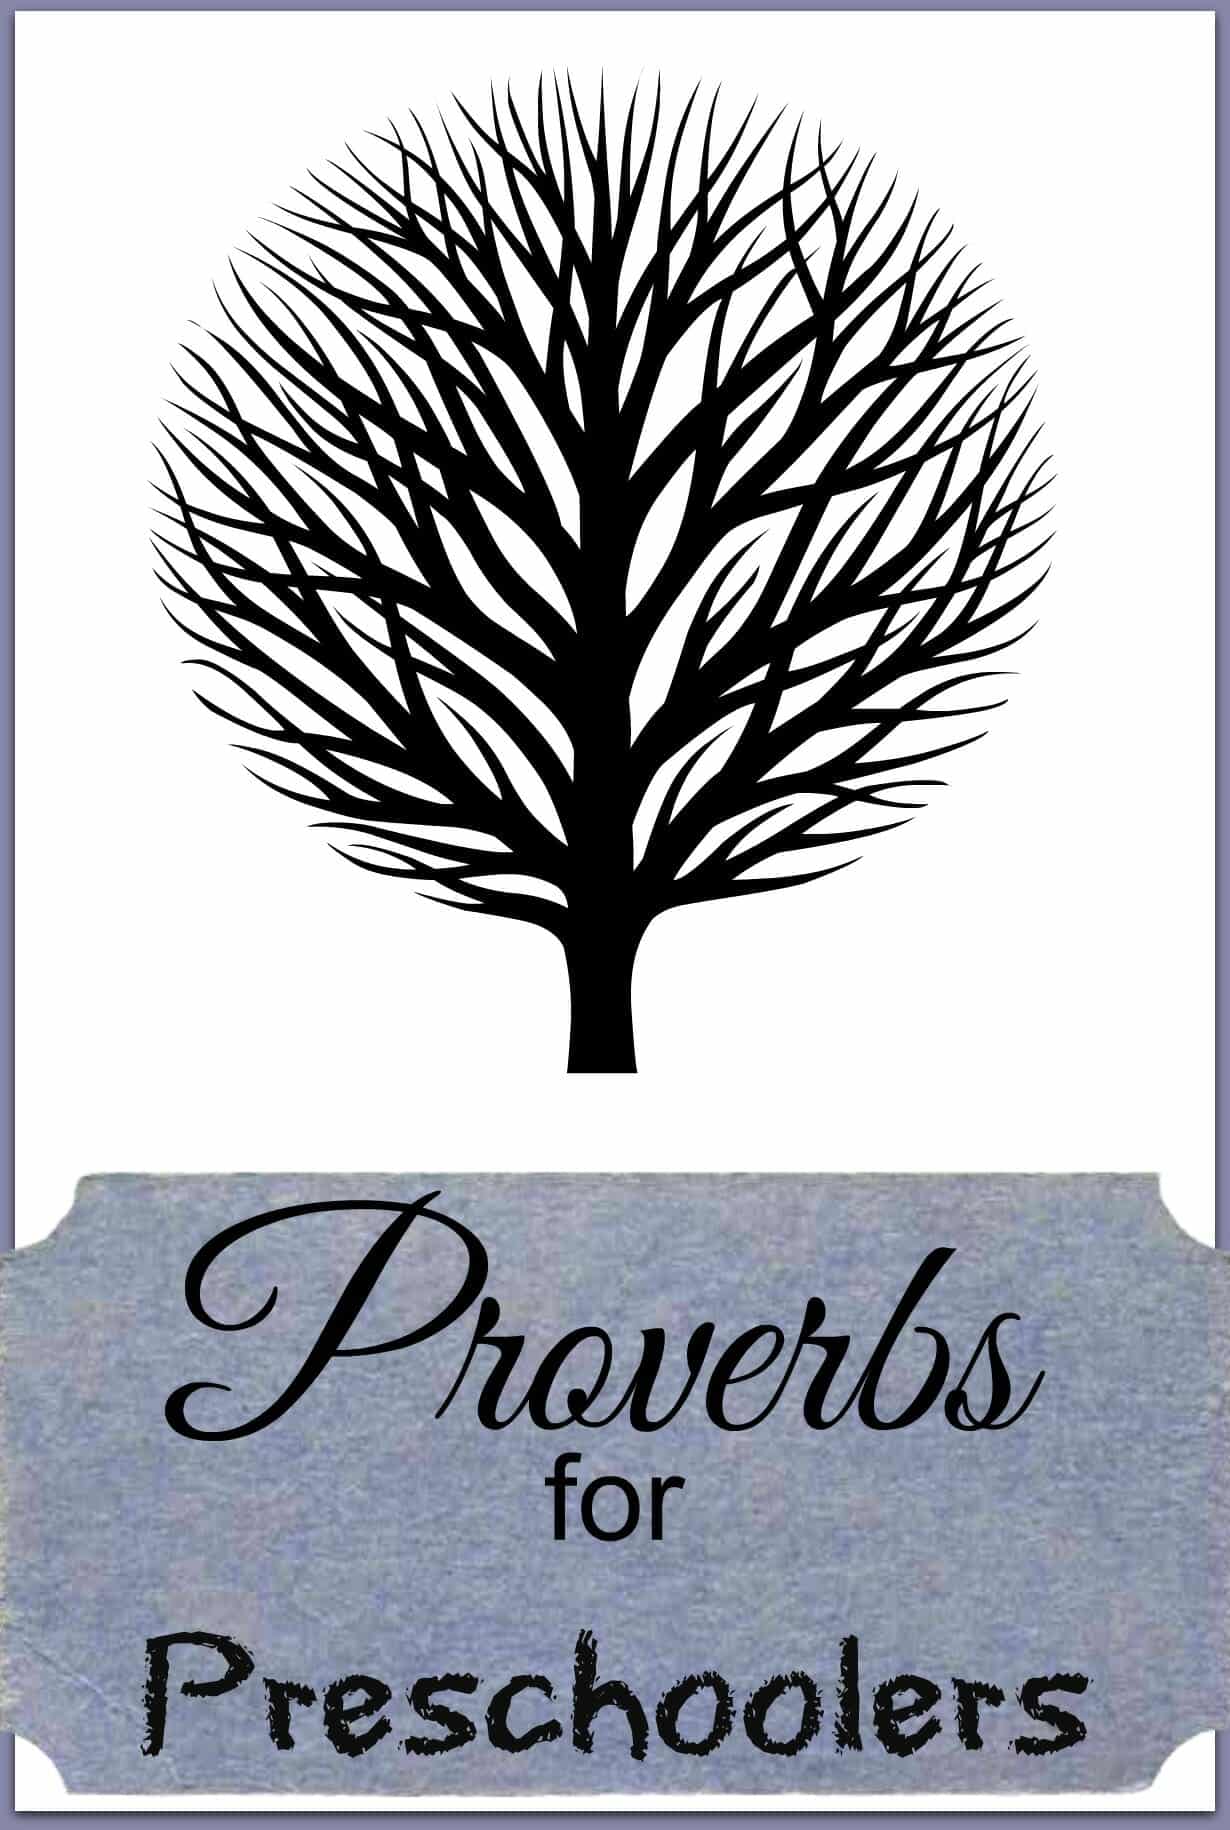 Proverbs for Preschoolers: Worry: Blessings